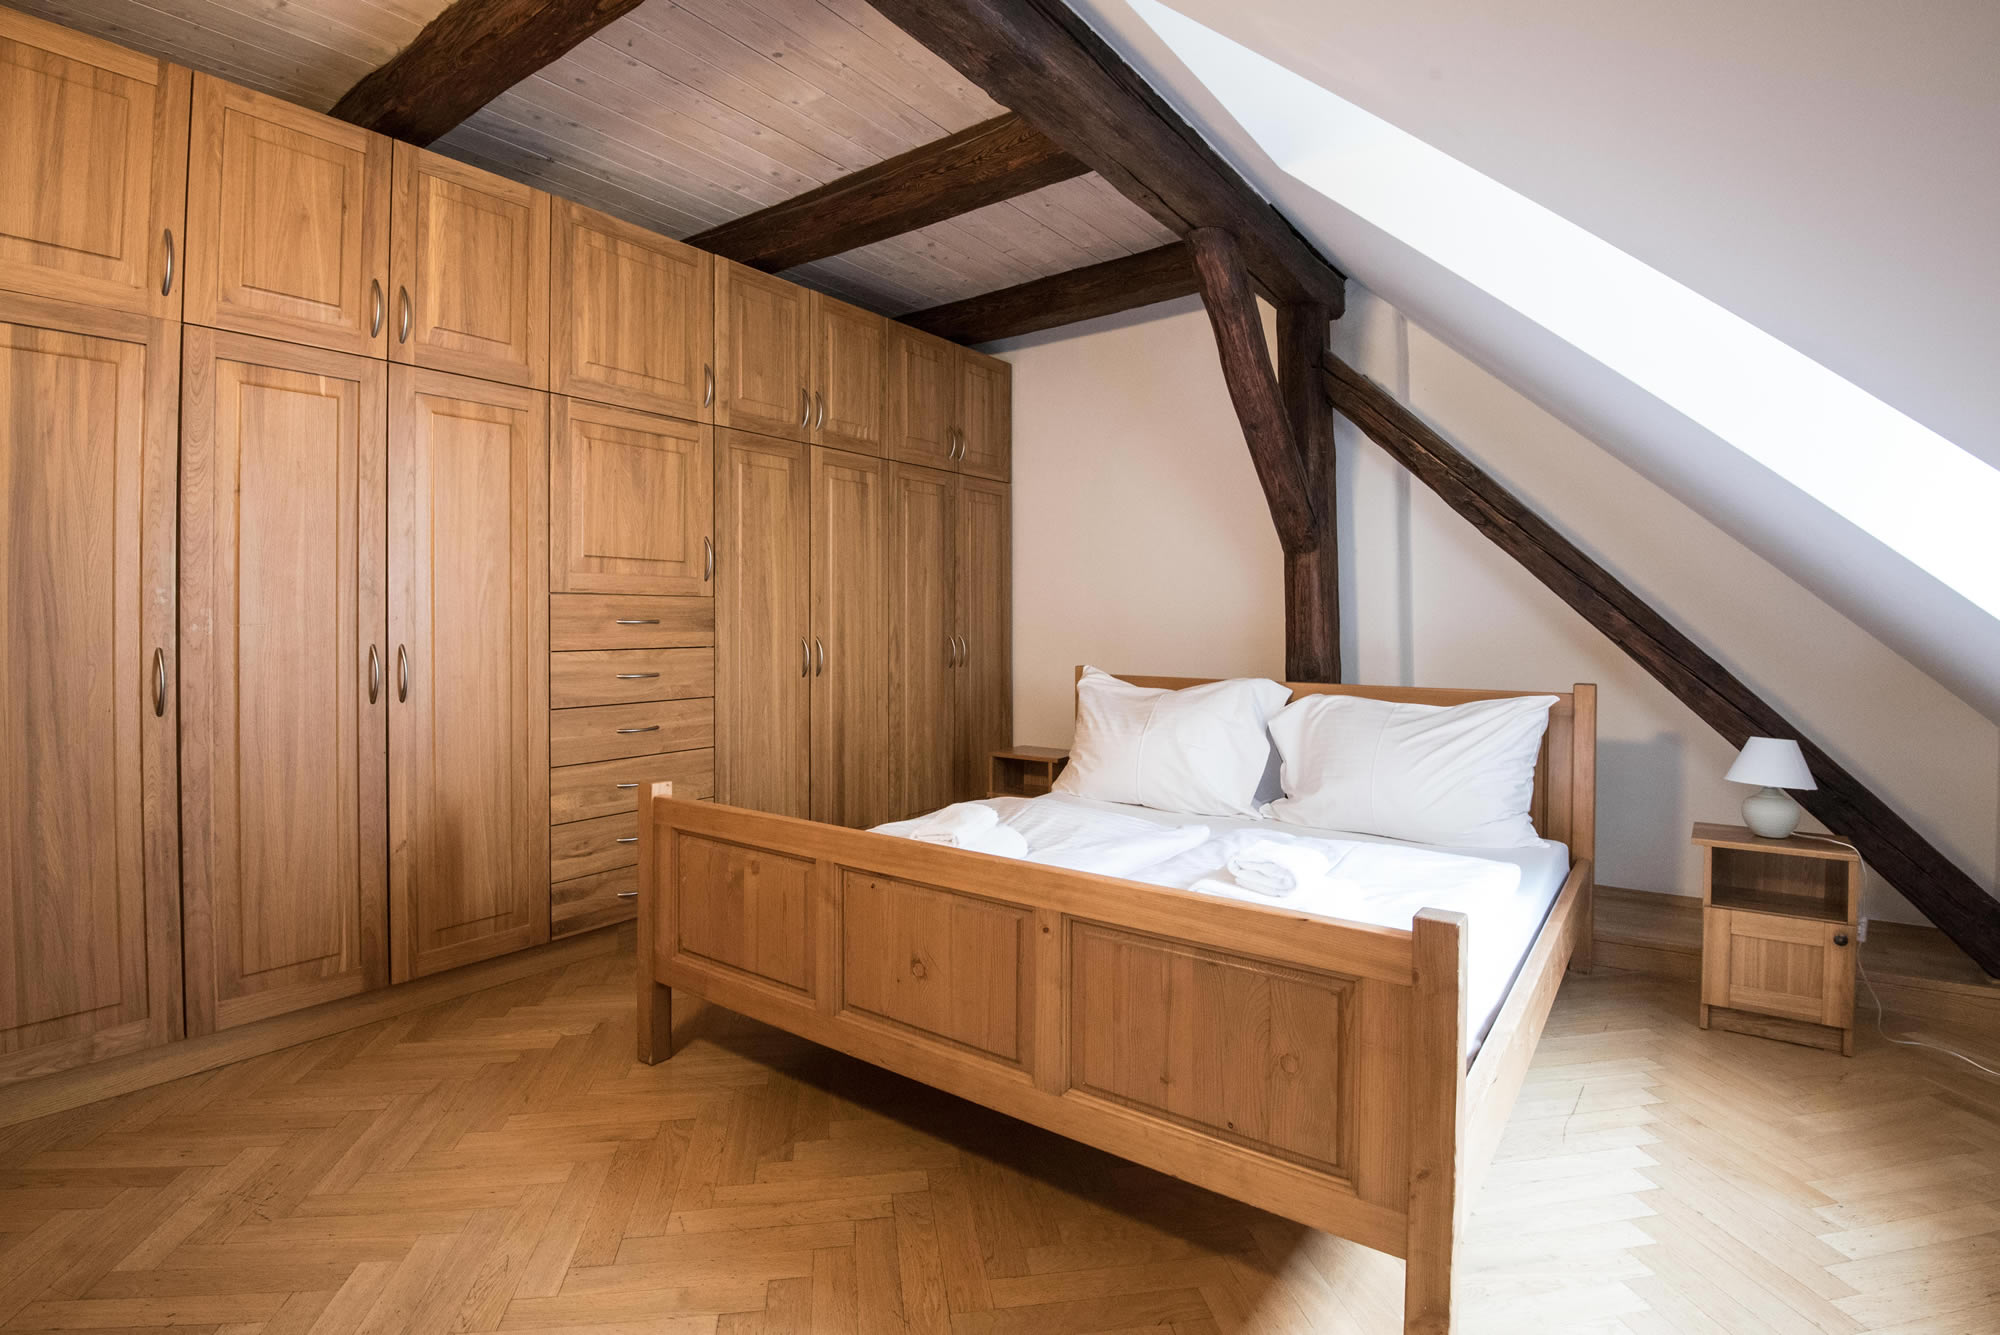 Bedroom with double bed. Wooden beam are in the attic room. Parquet on the floor and large wooden closet on the wall.